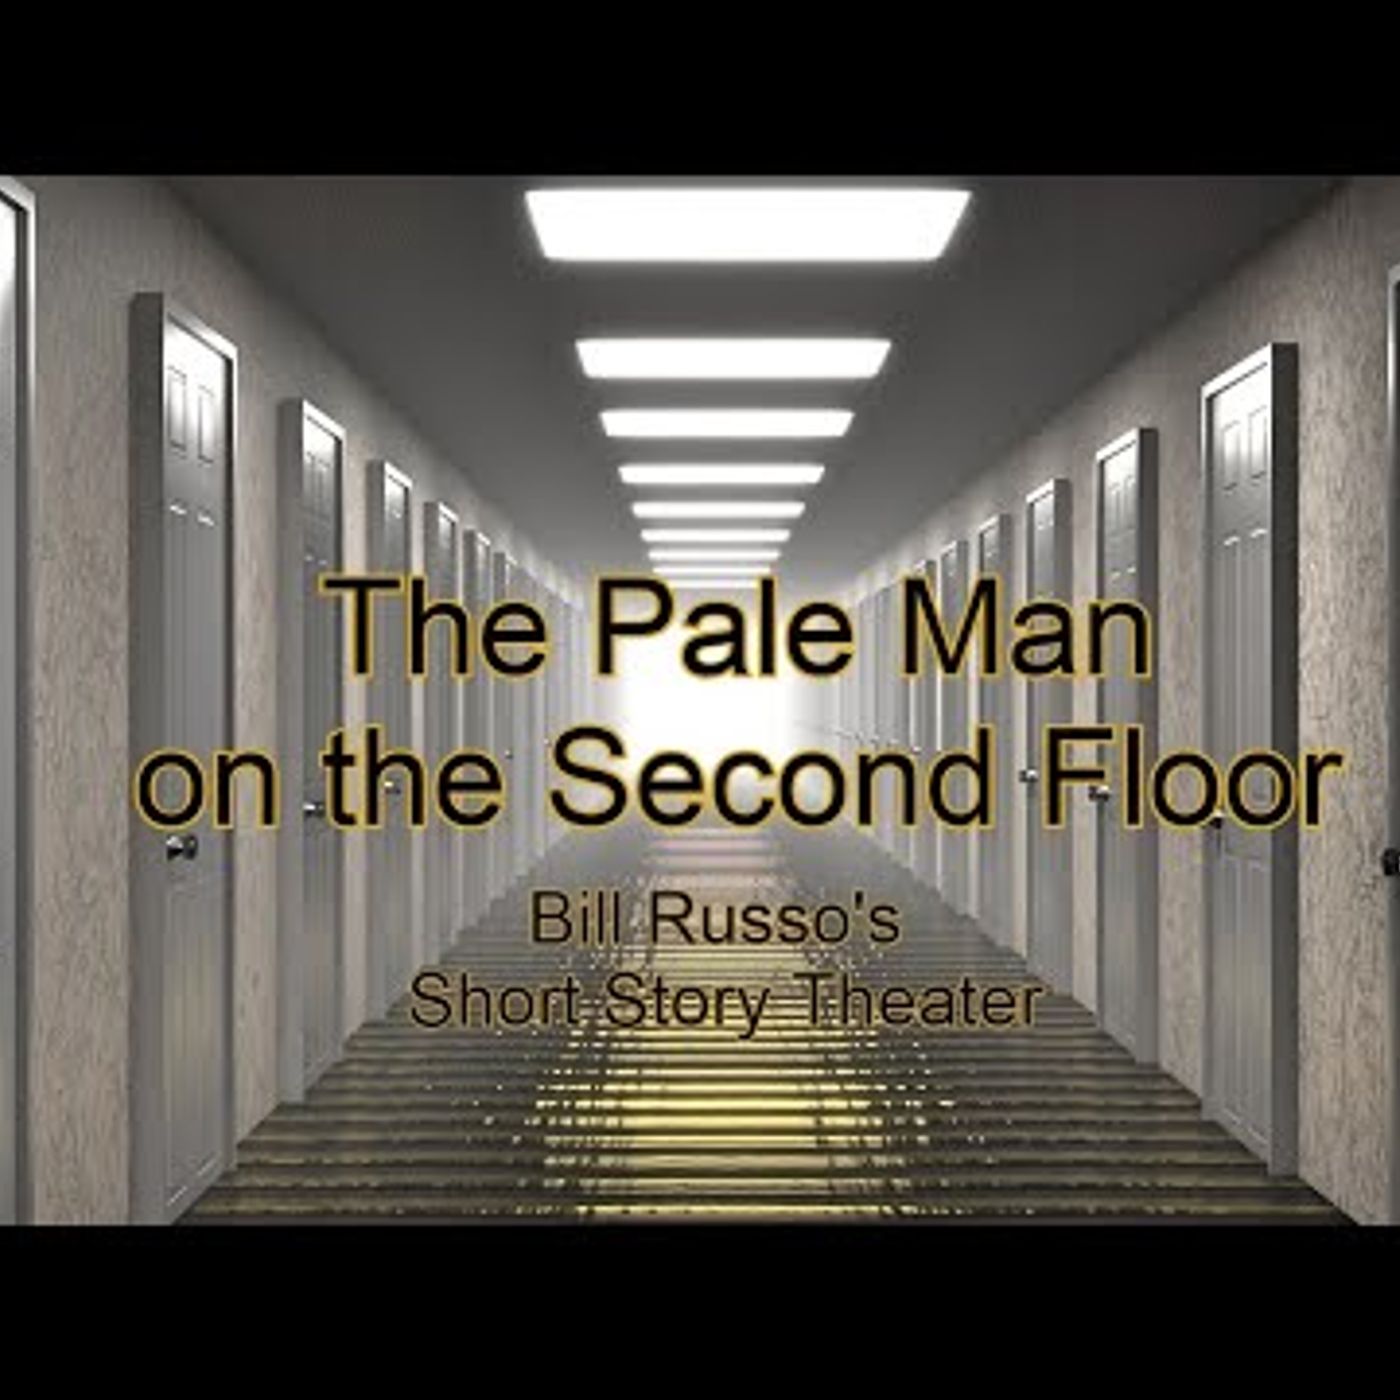 The Pale Man on the Second Floor